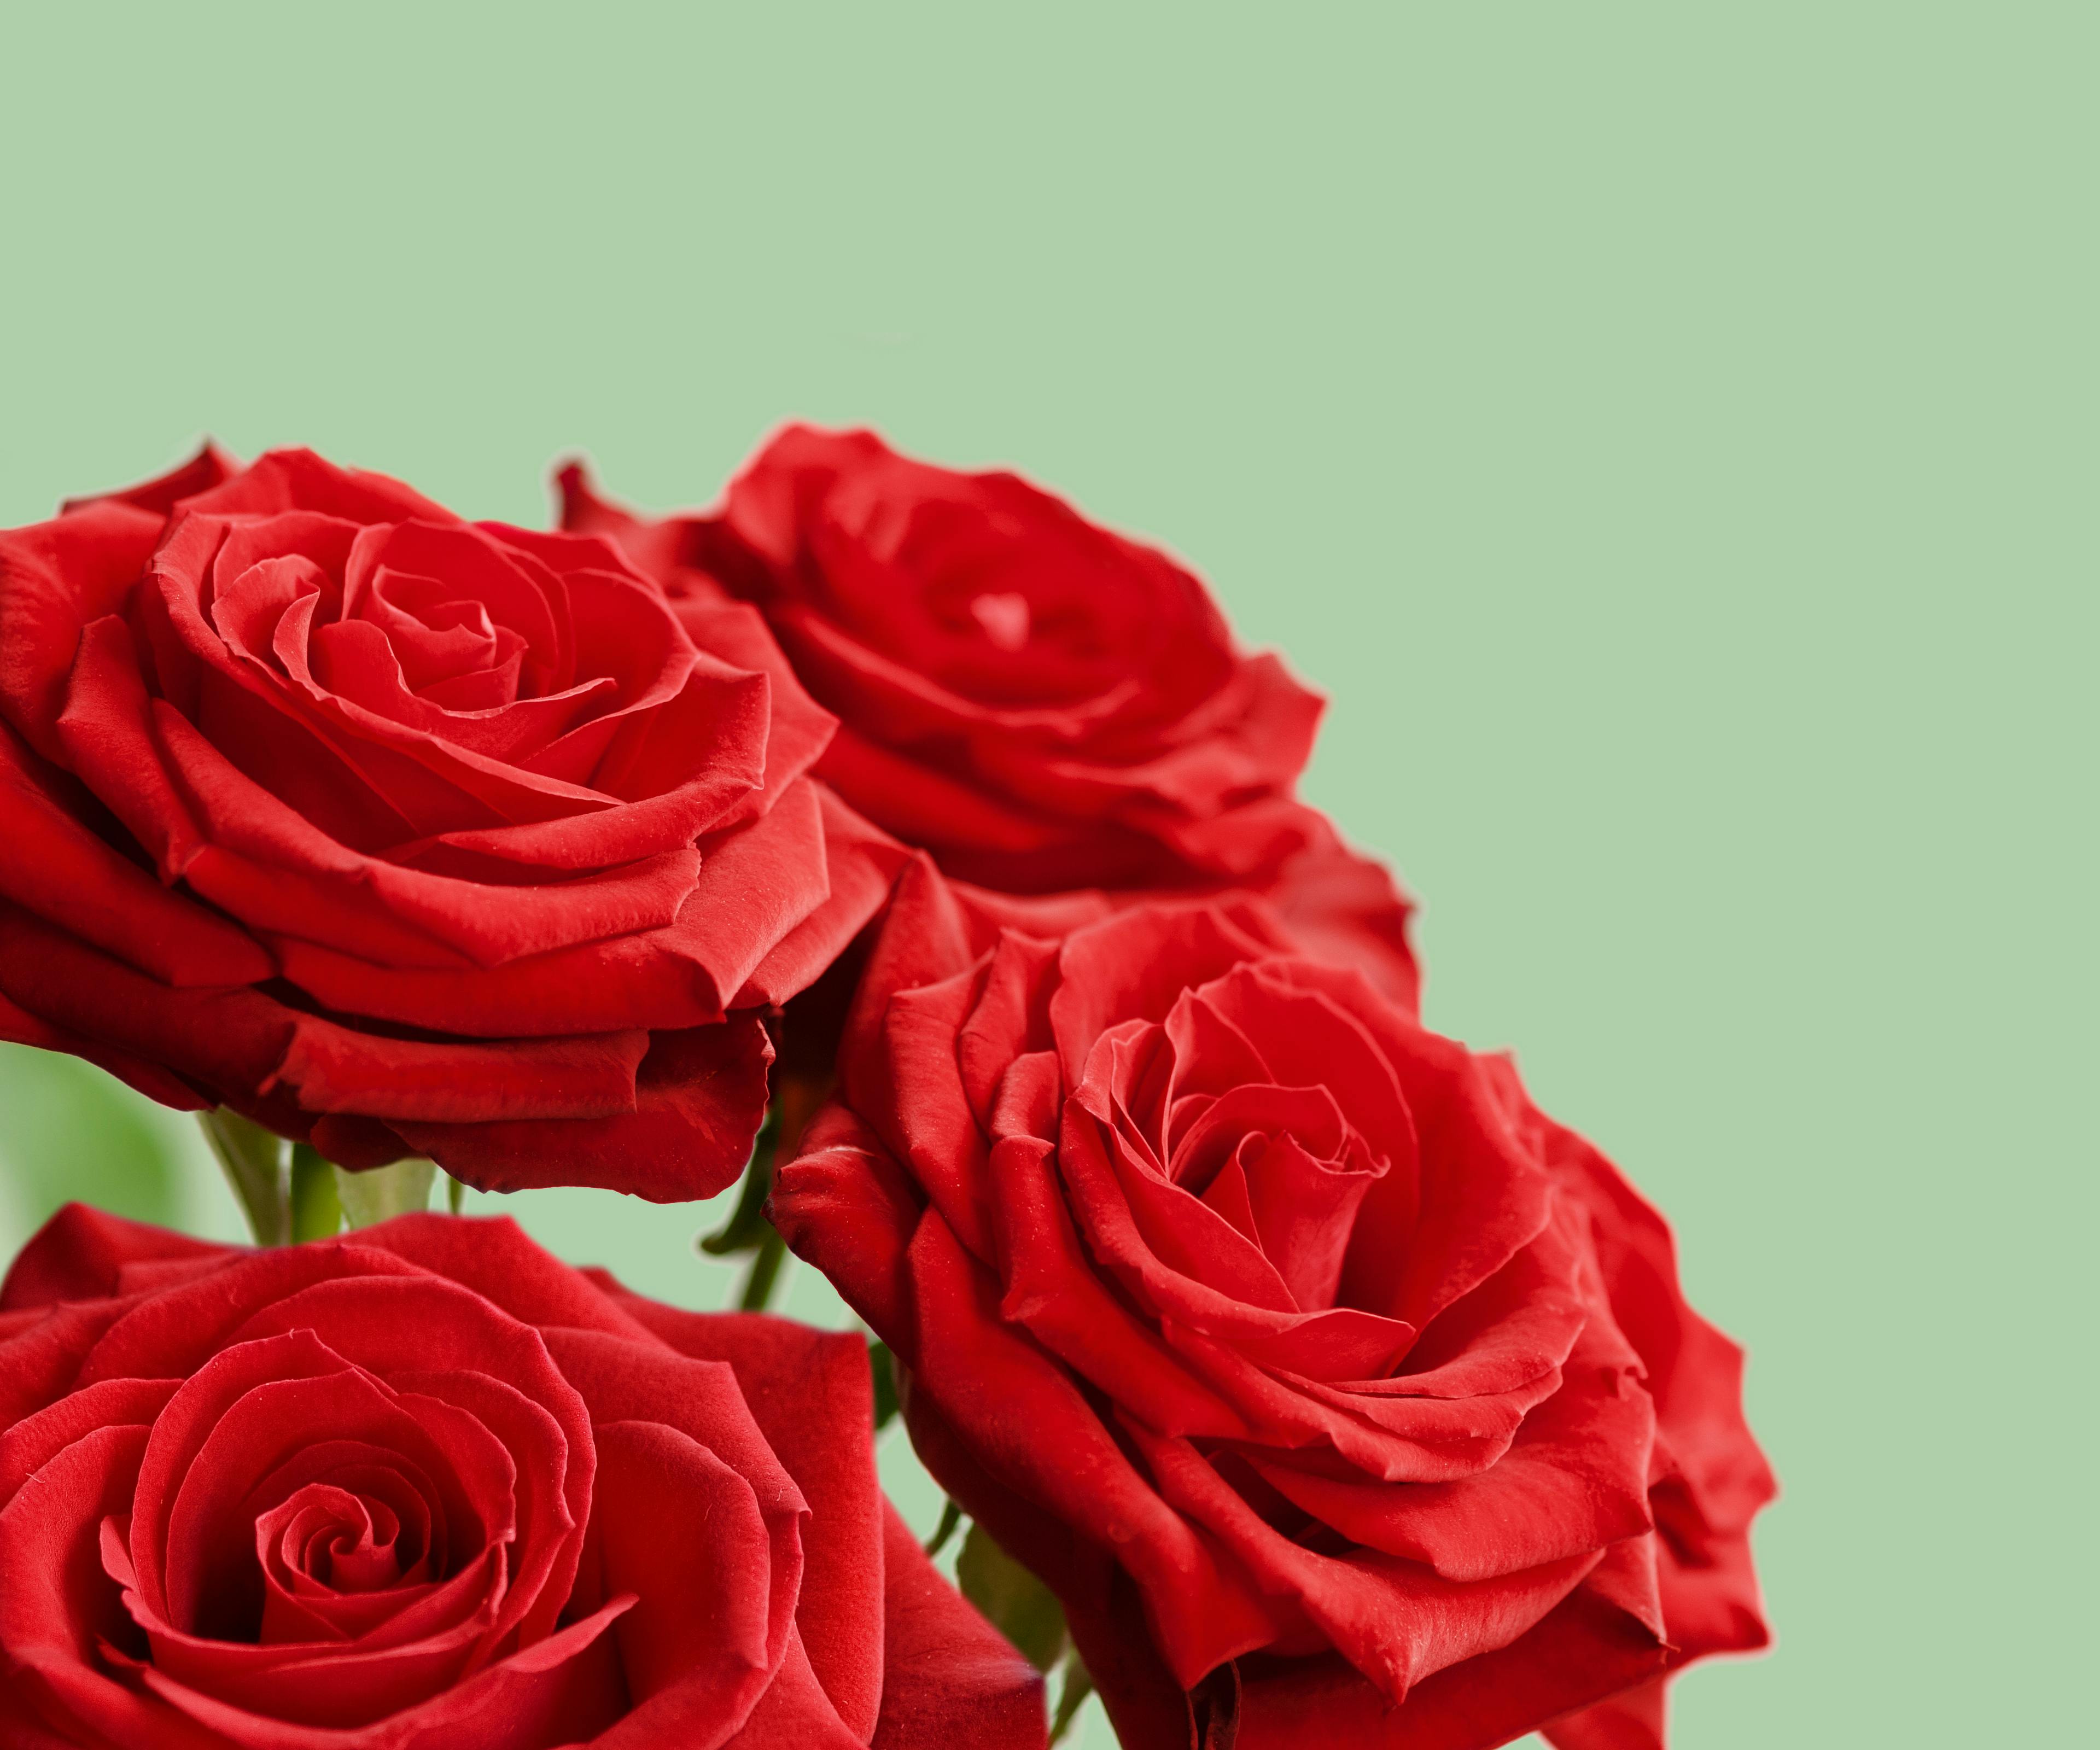 Red Rose Flowers In Close Up View Free Stock Photo